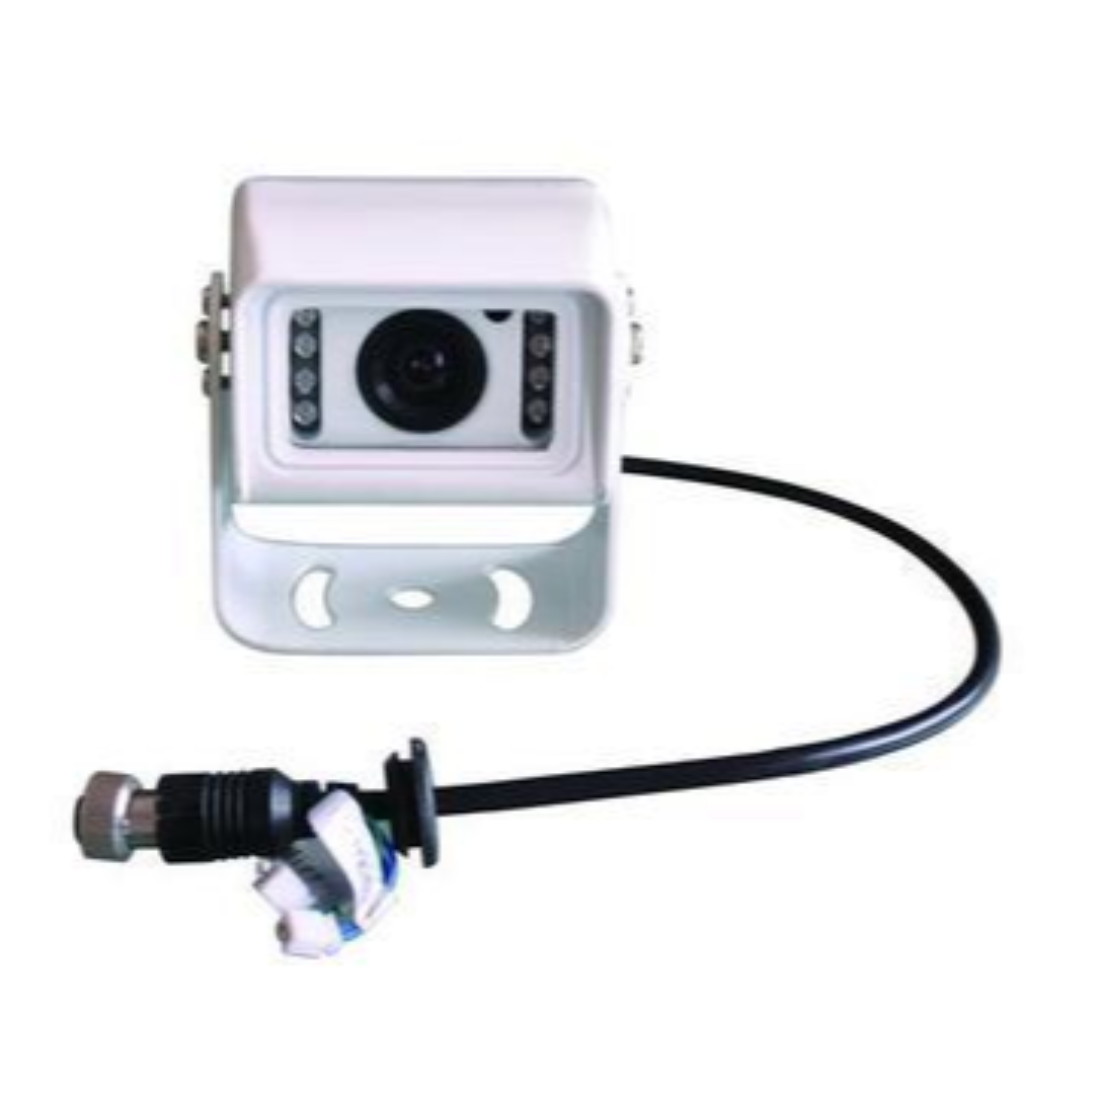 Boyo VTB201MA Marine HD Back-Up Camera with Night Vision & Built-In Microphone